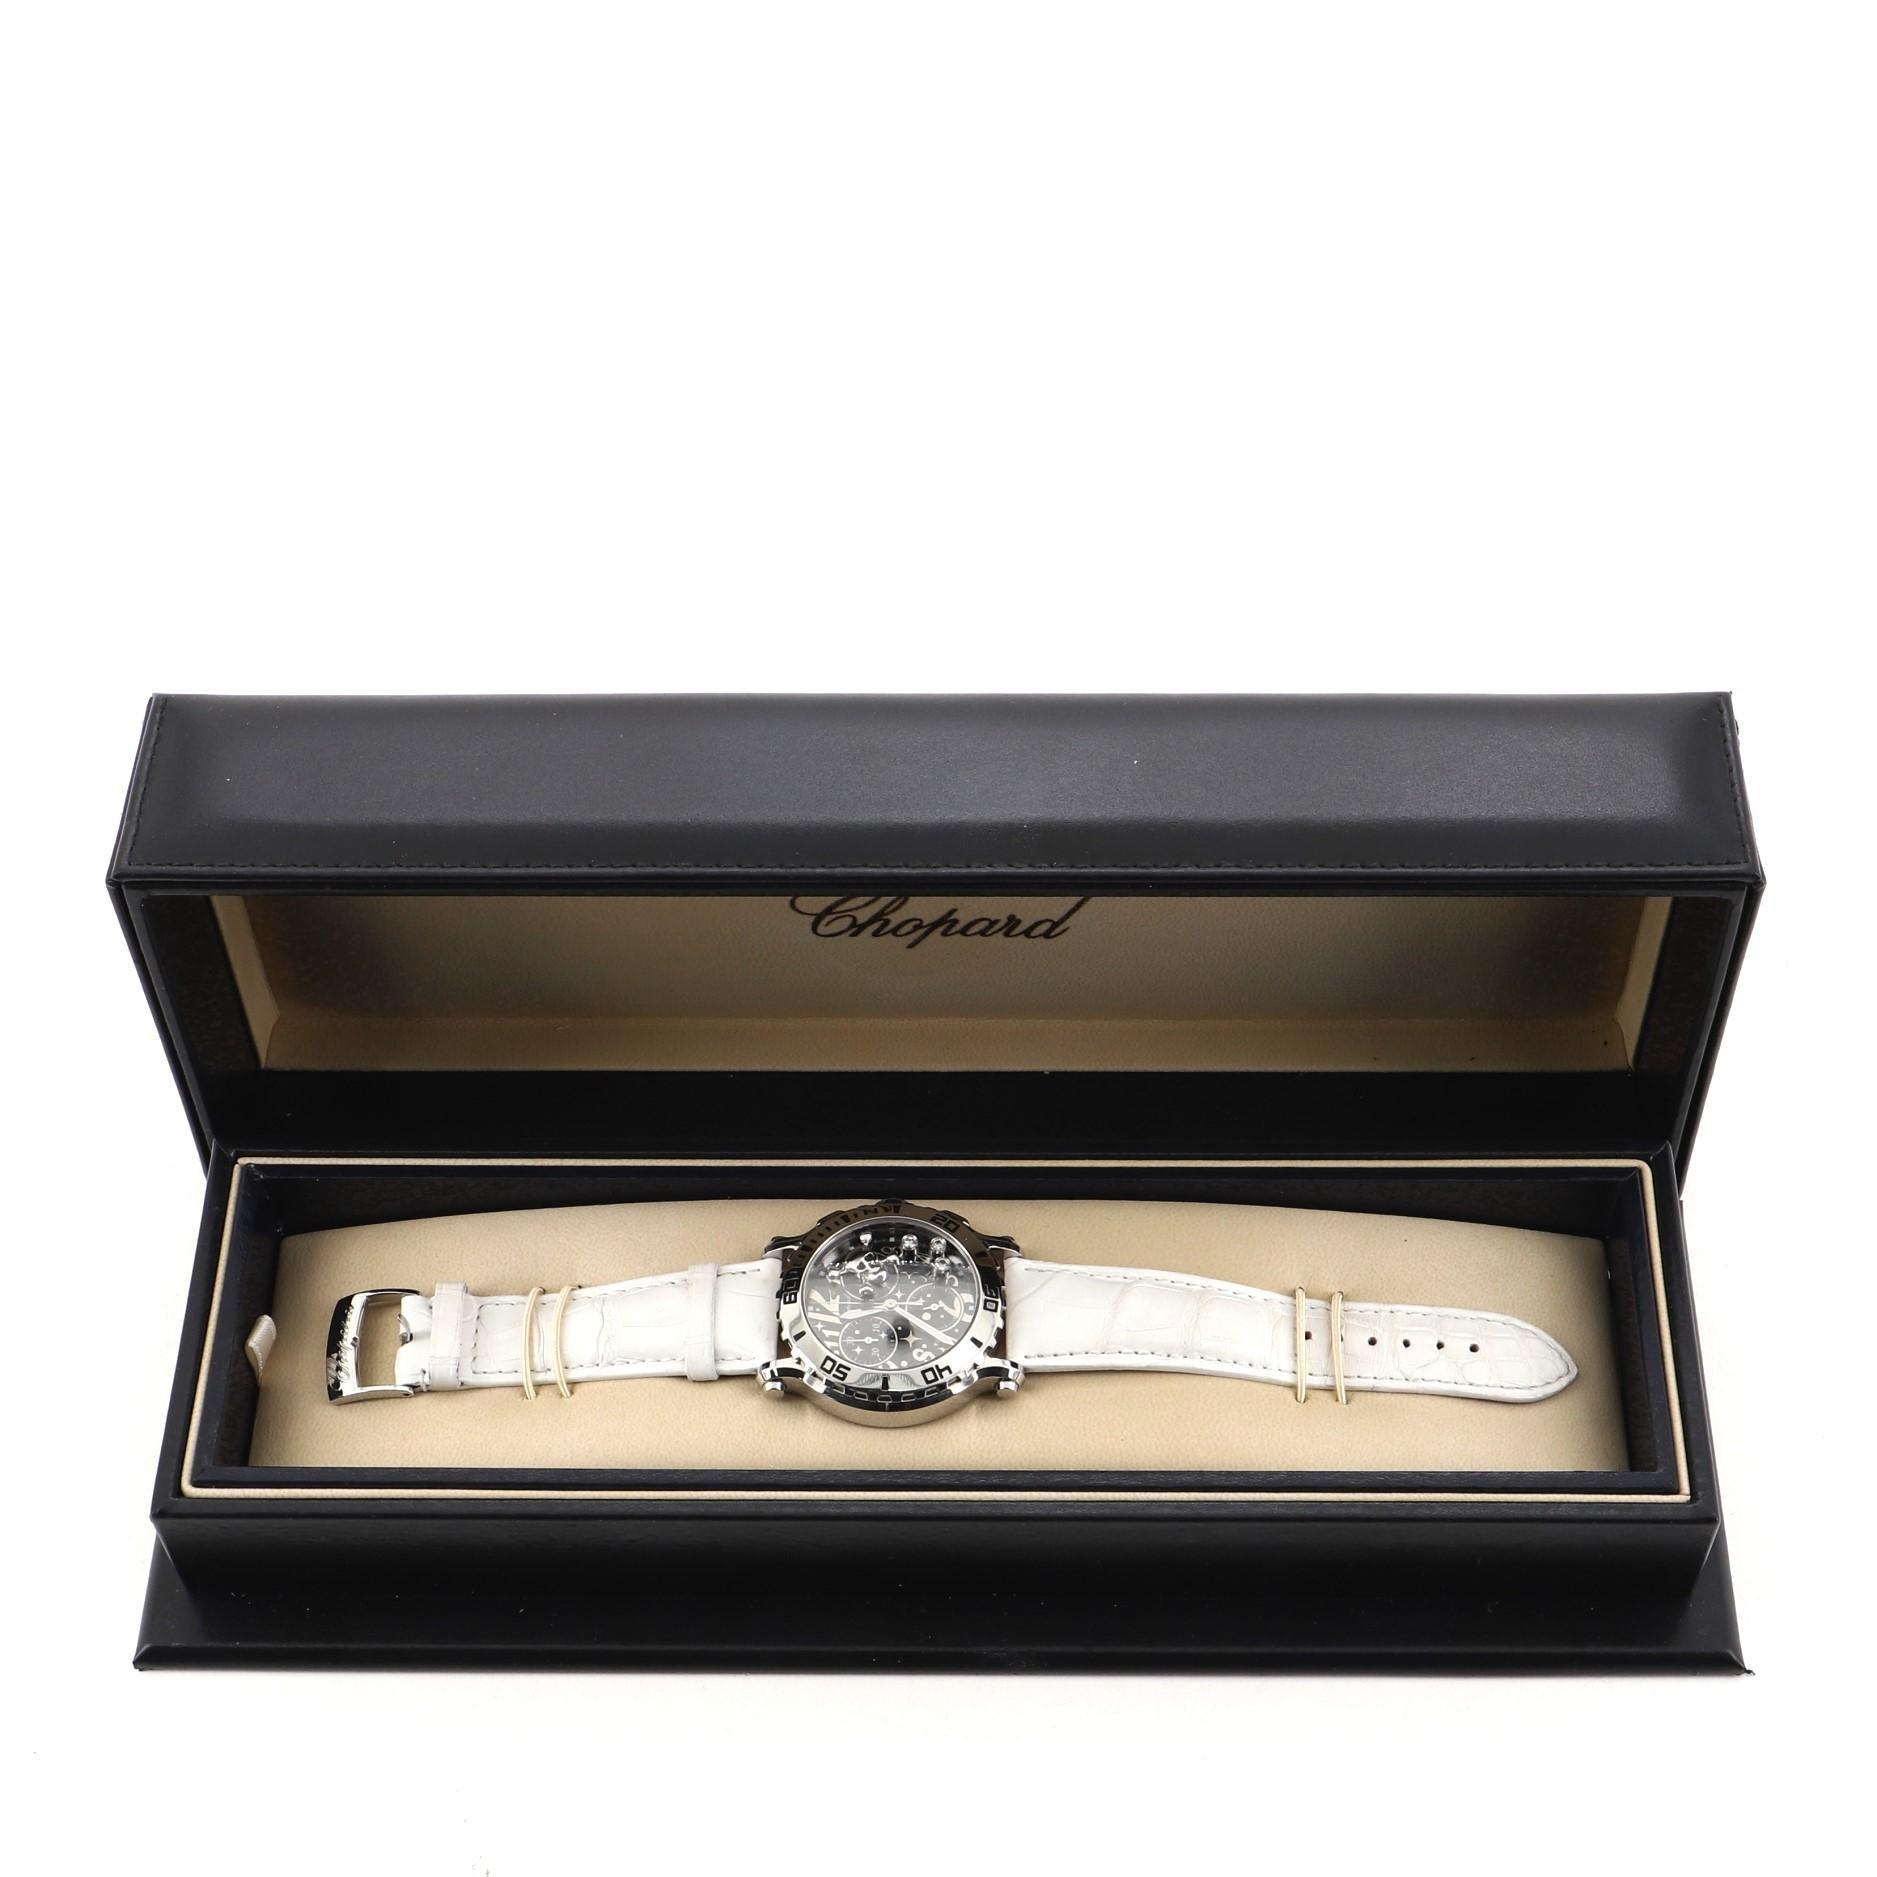 Condition: Good. Moderate wear, slight cracking and darkening on strap, scratches on hardware.
Accessories: Box
Measurements: Case Size/Width: 42mm, Watch Height: 13mm, Band Width: 22mm, Wrist circumference: 6